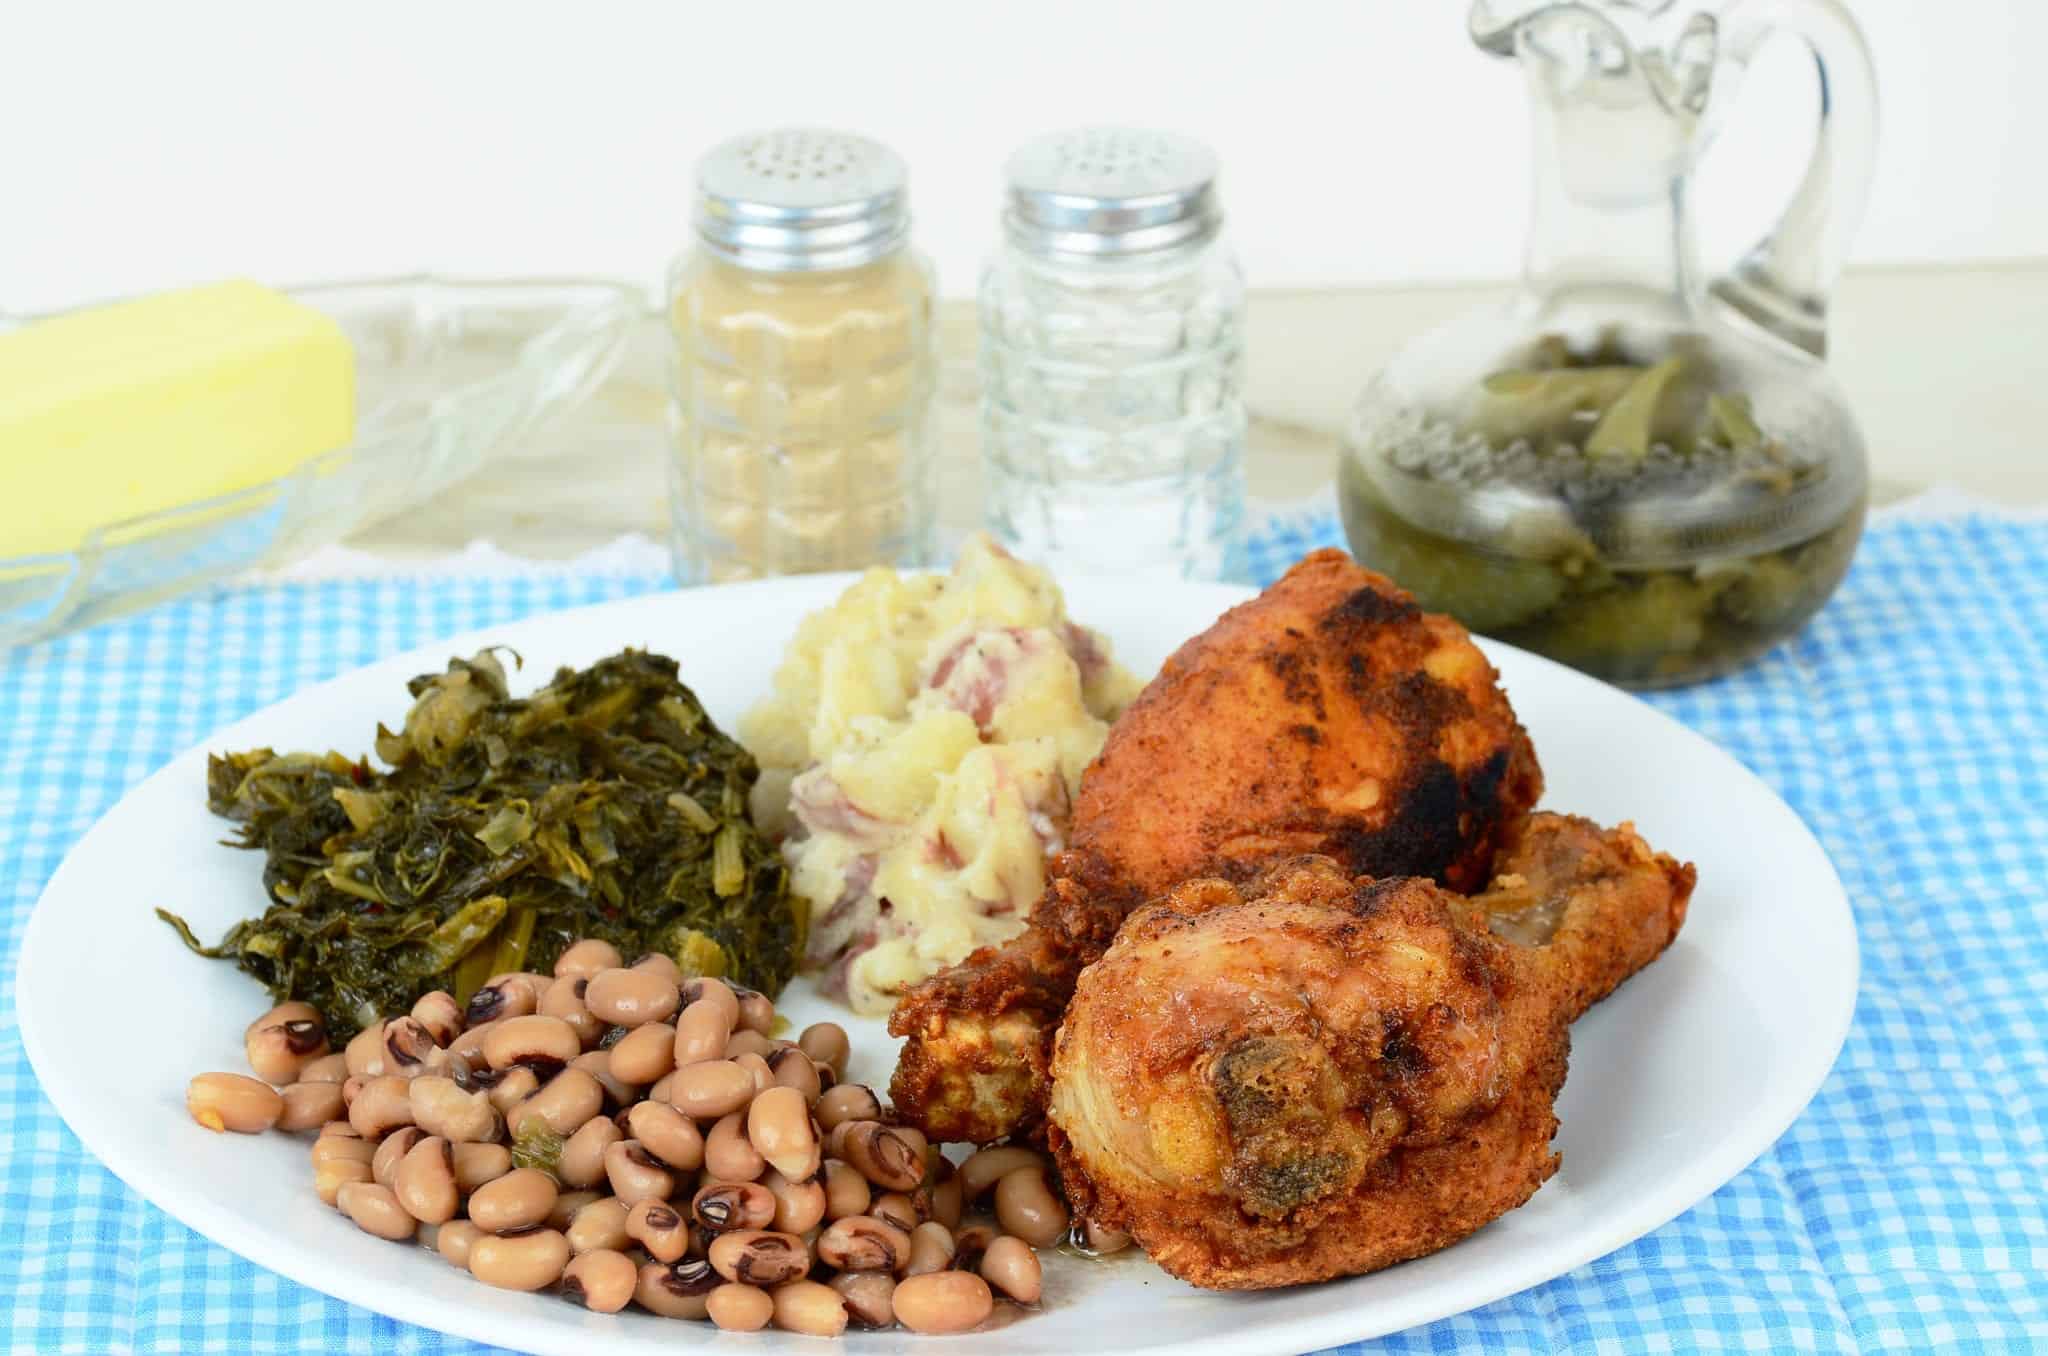 Southern food consisting of fried chicken, greens, beans, and mashed potatoes